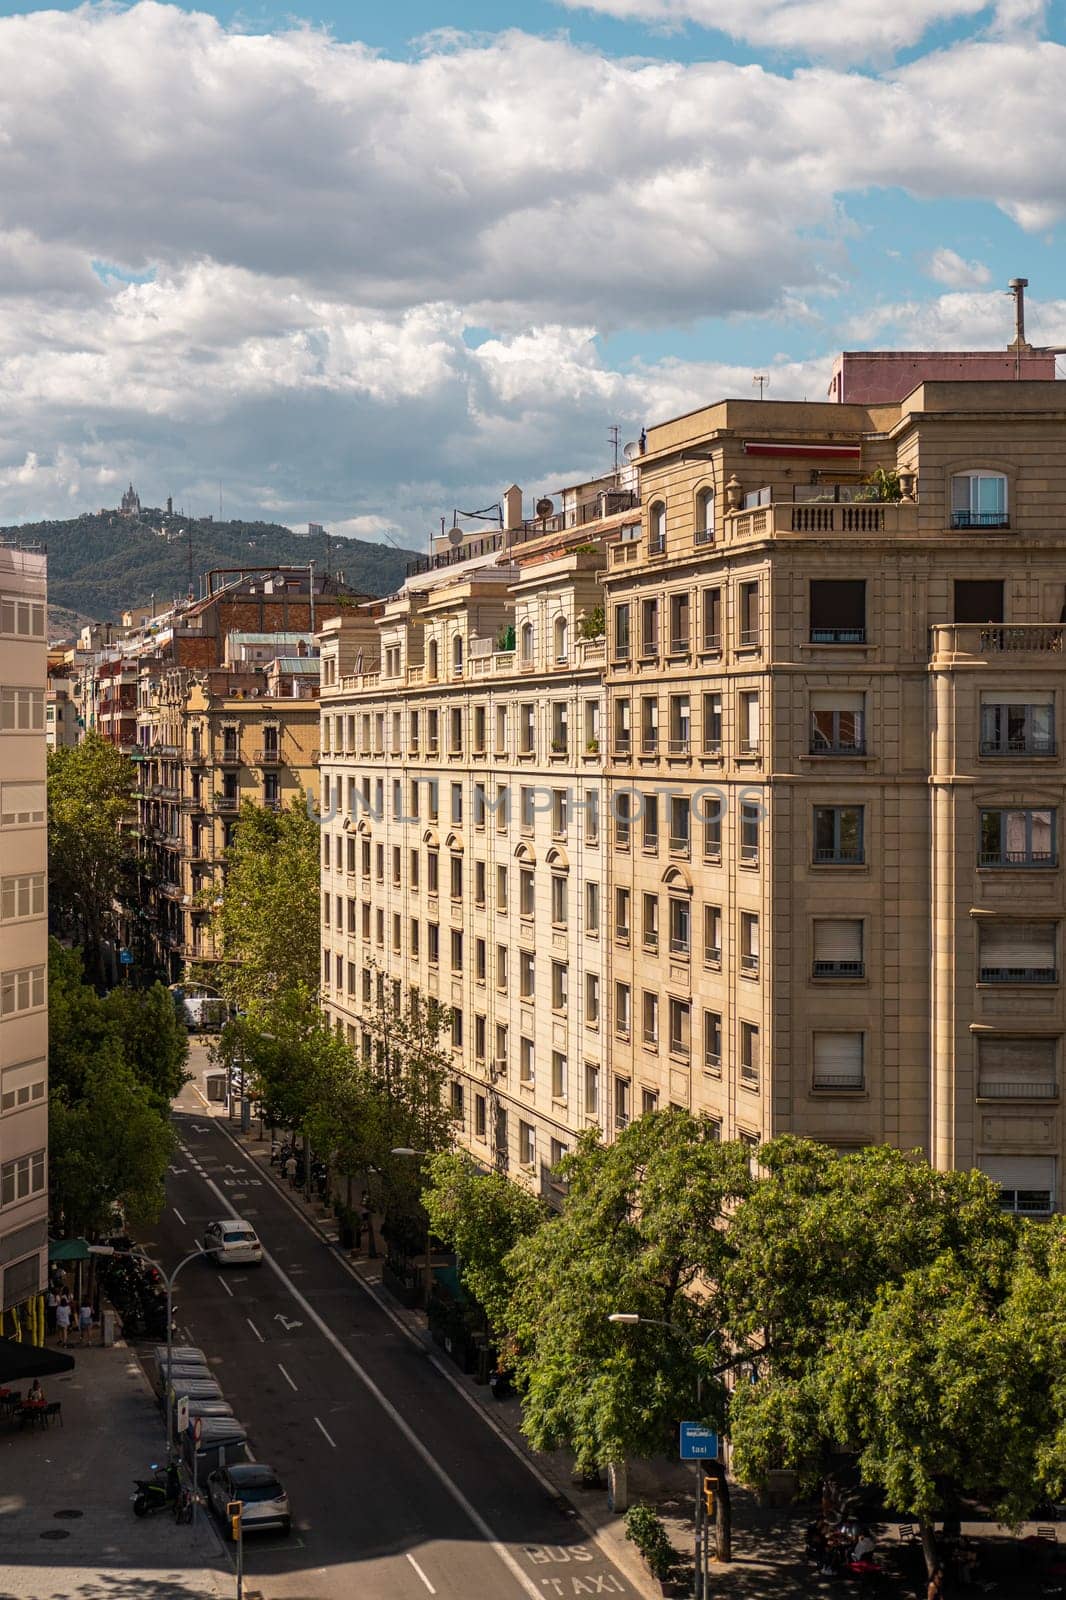 Cityscape showcasing classic architecture and green-lined streets in Barcelona under a cloudy sky.